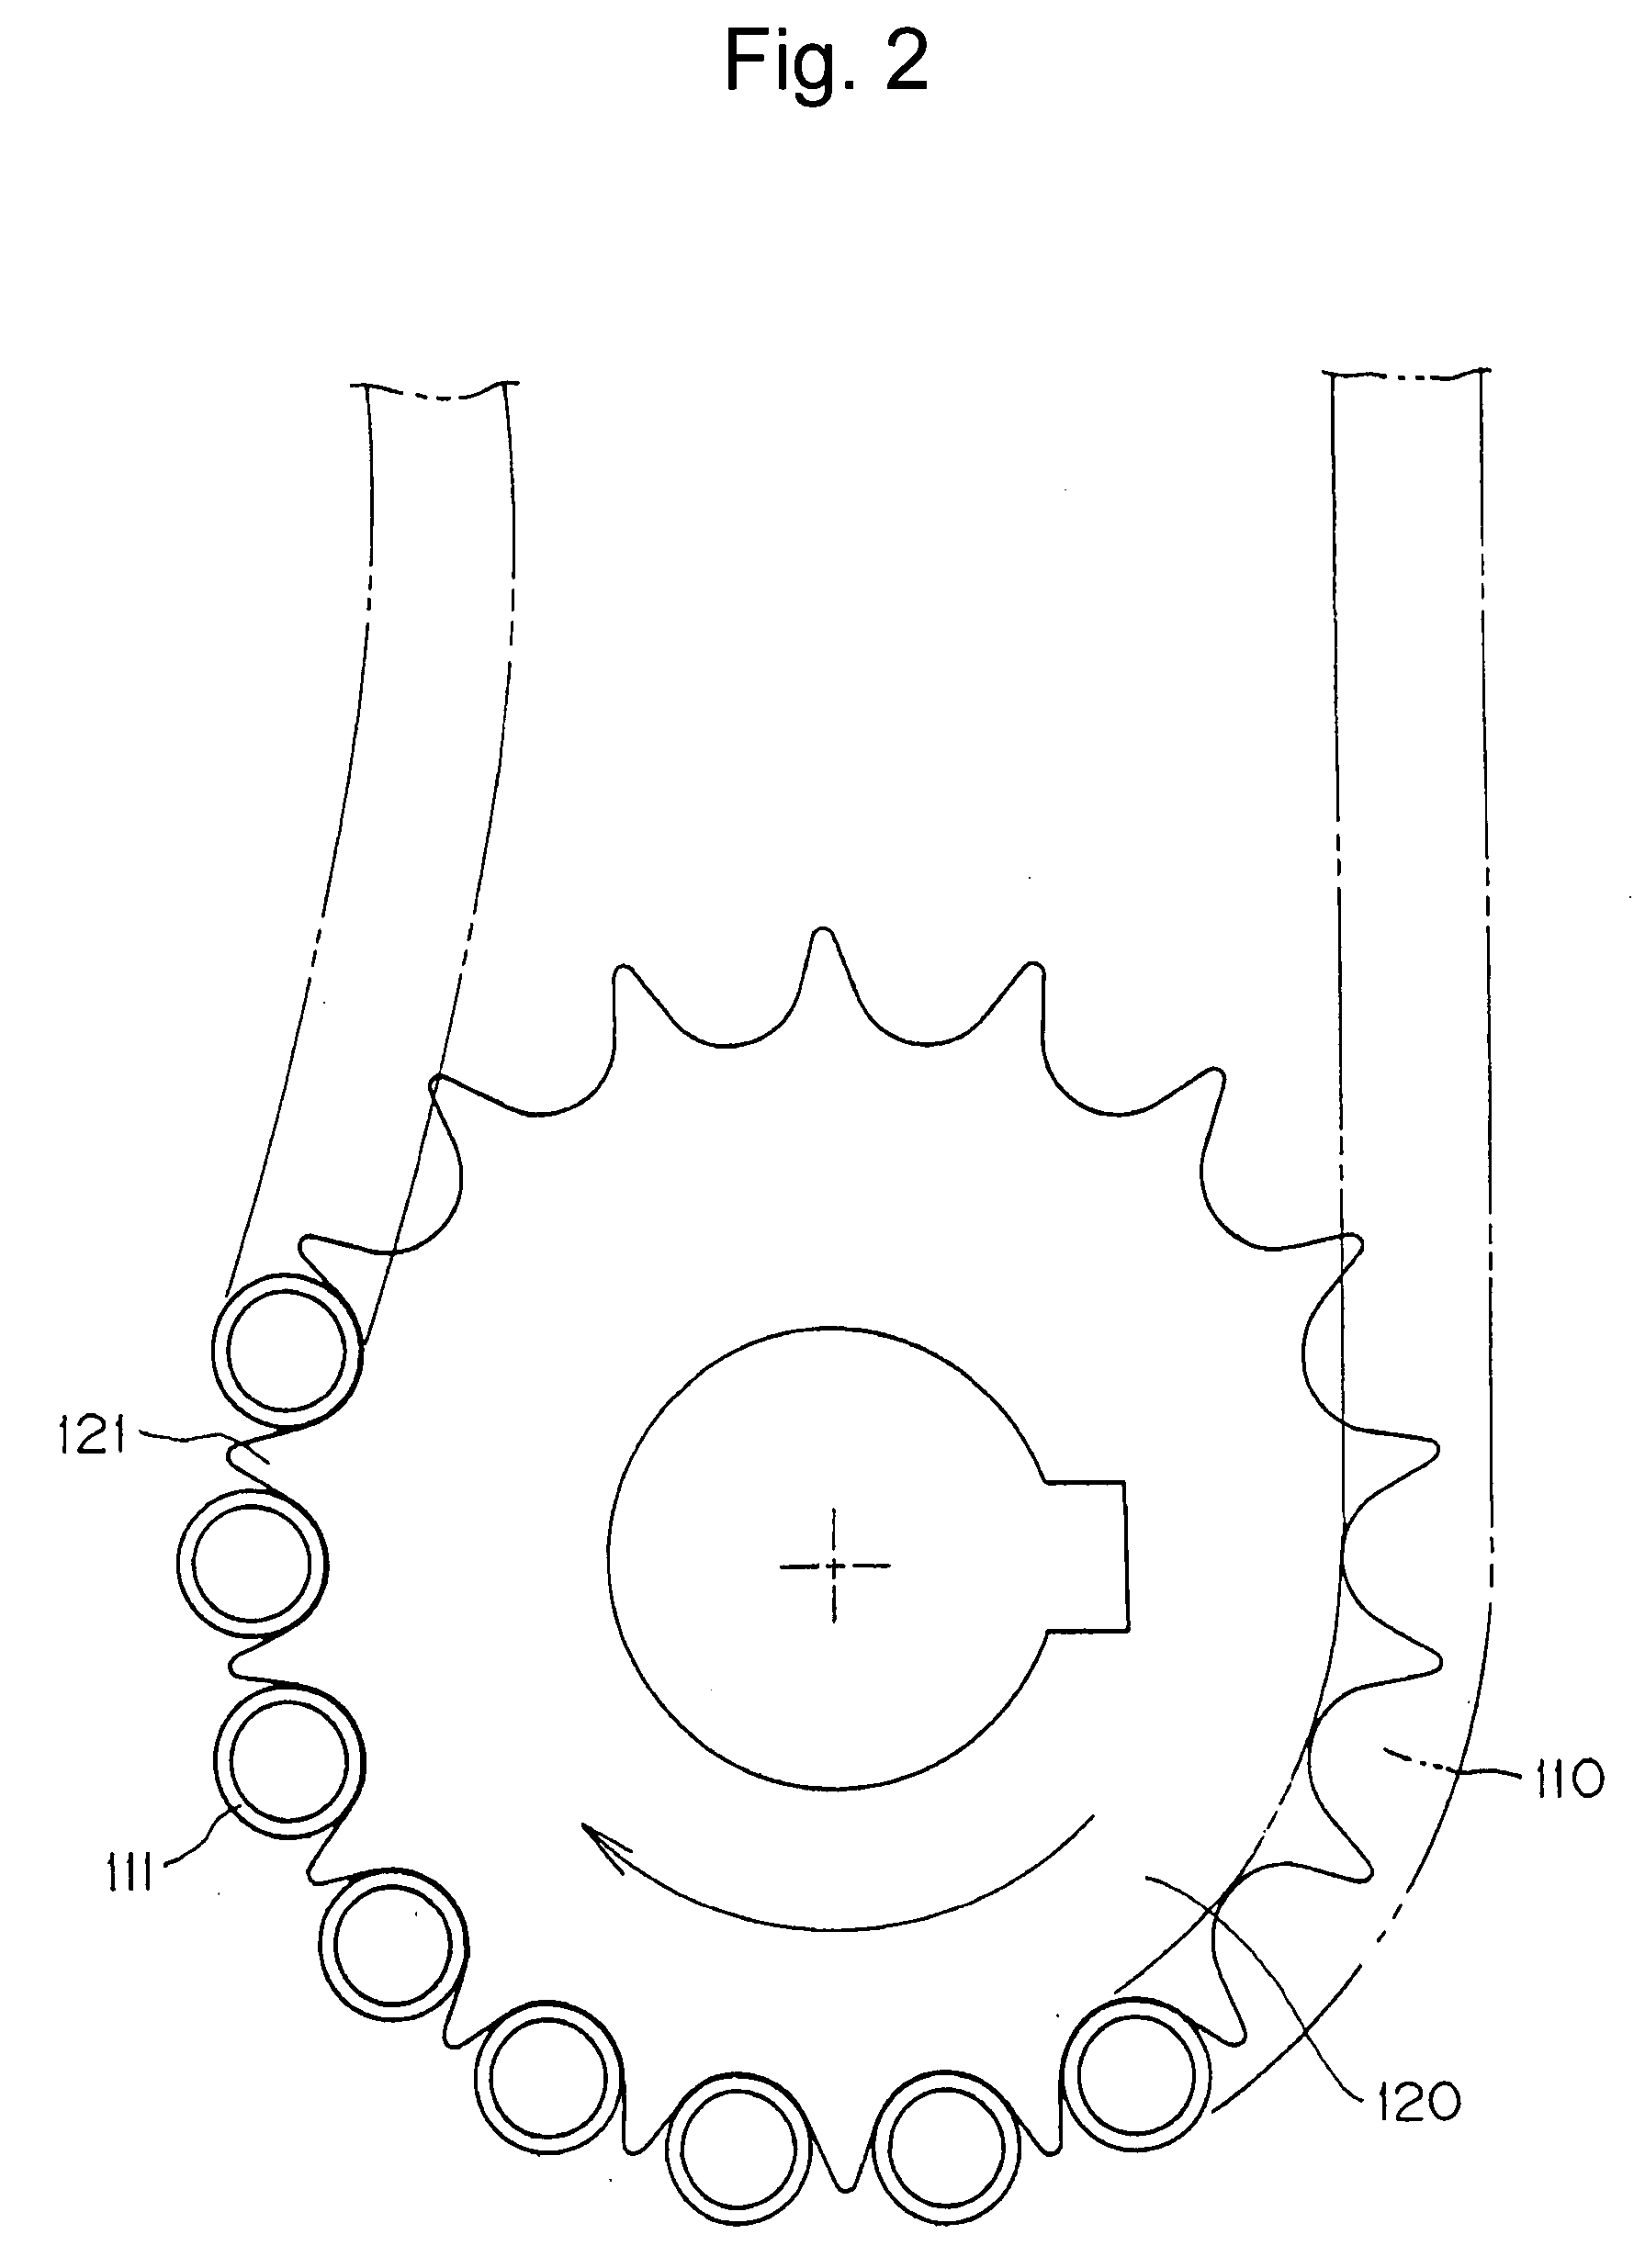 Roller chain transmission device